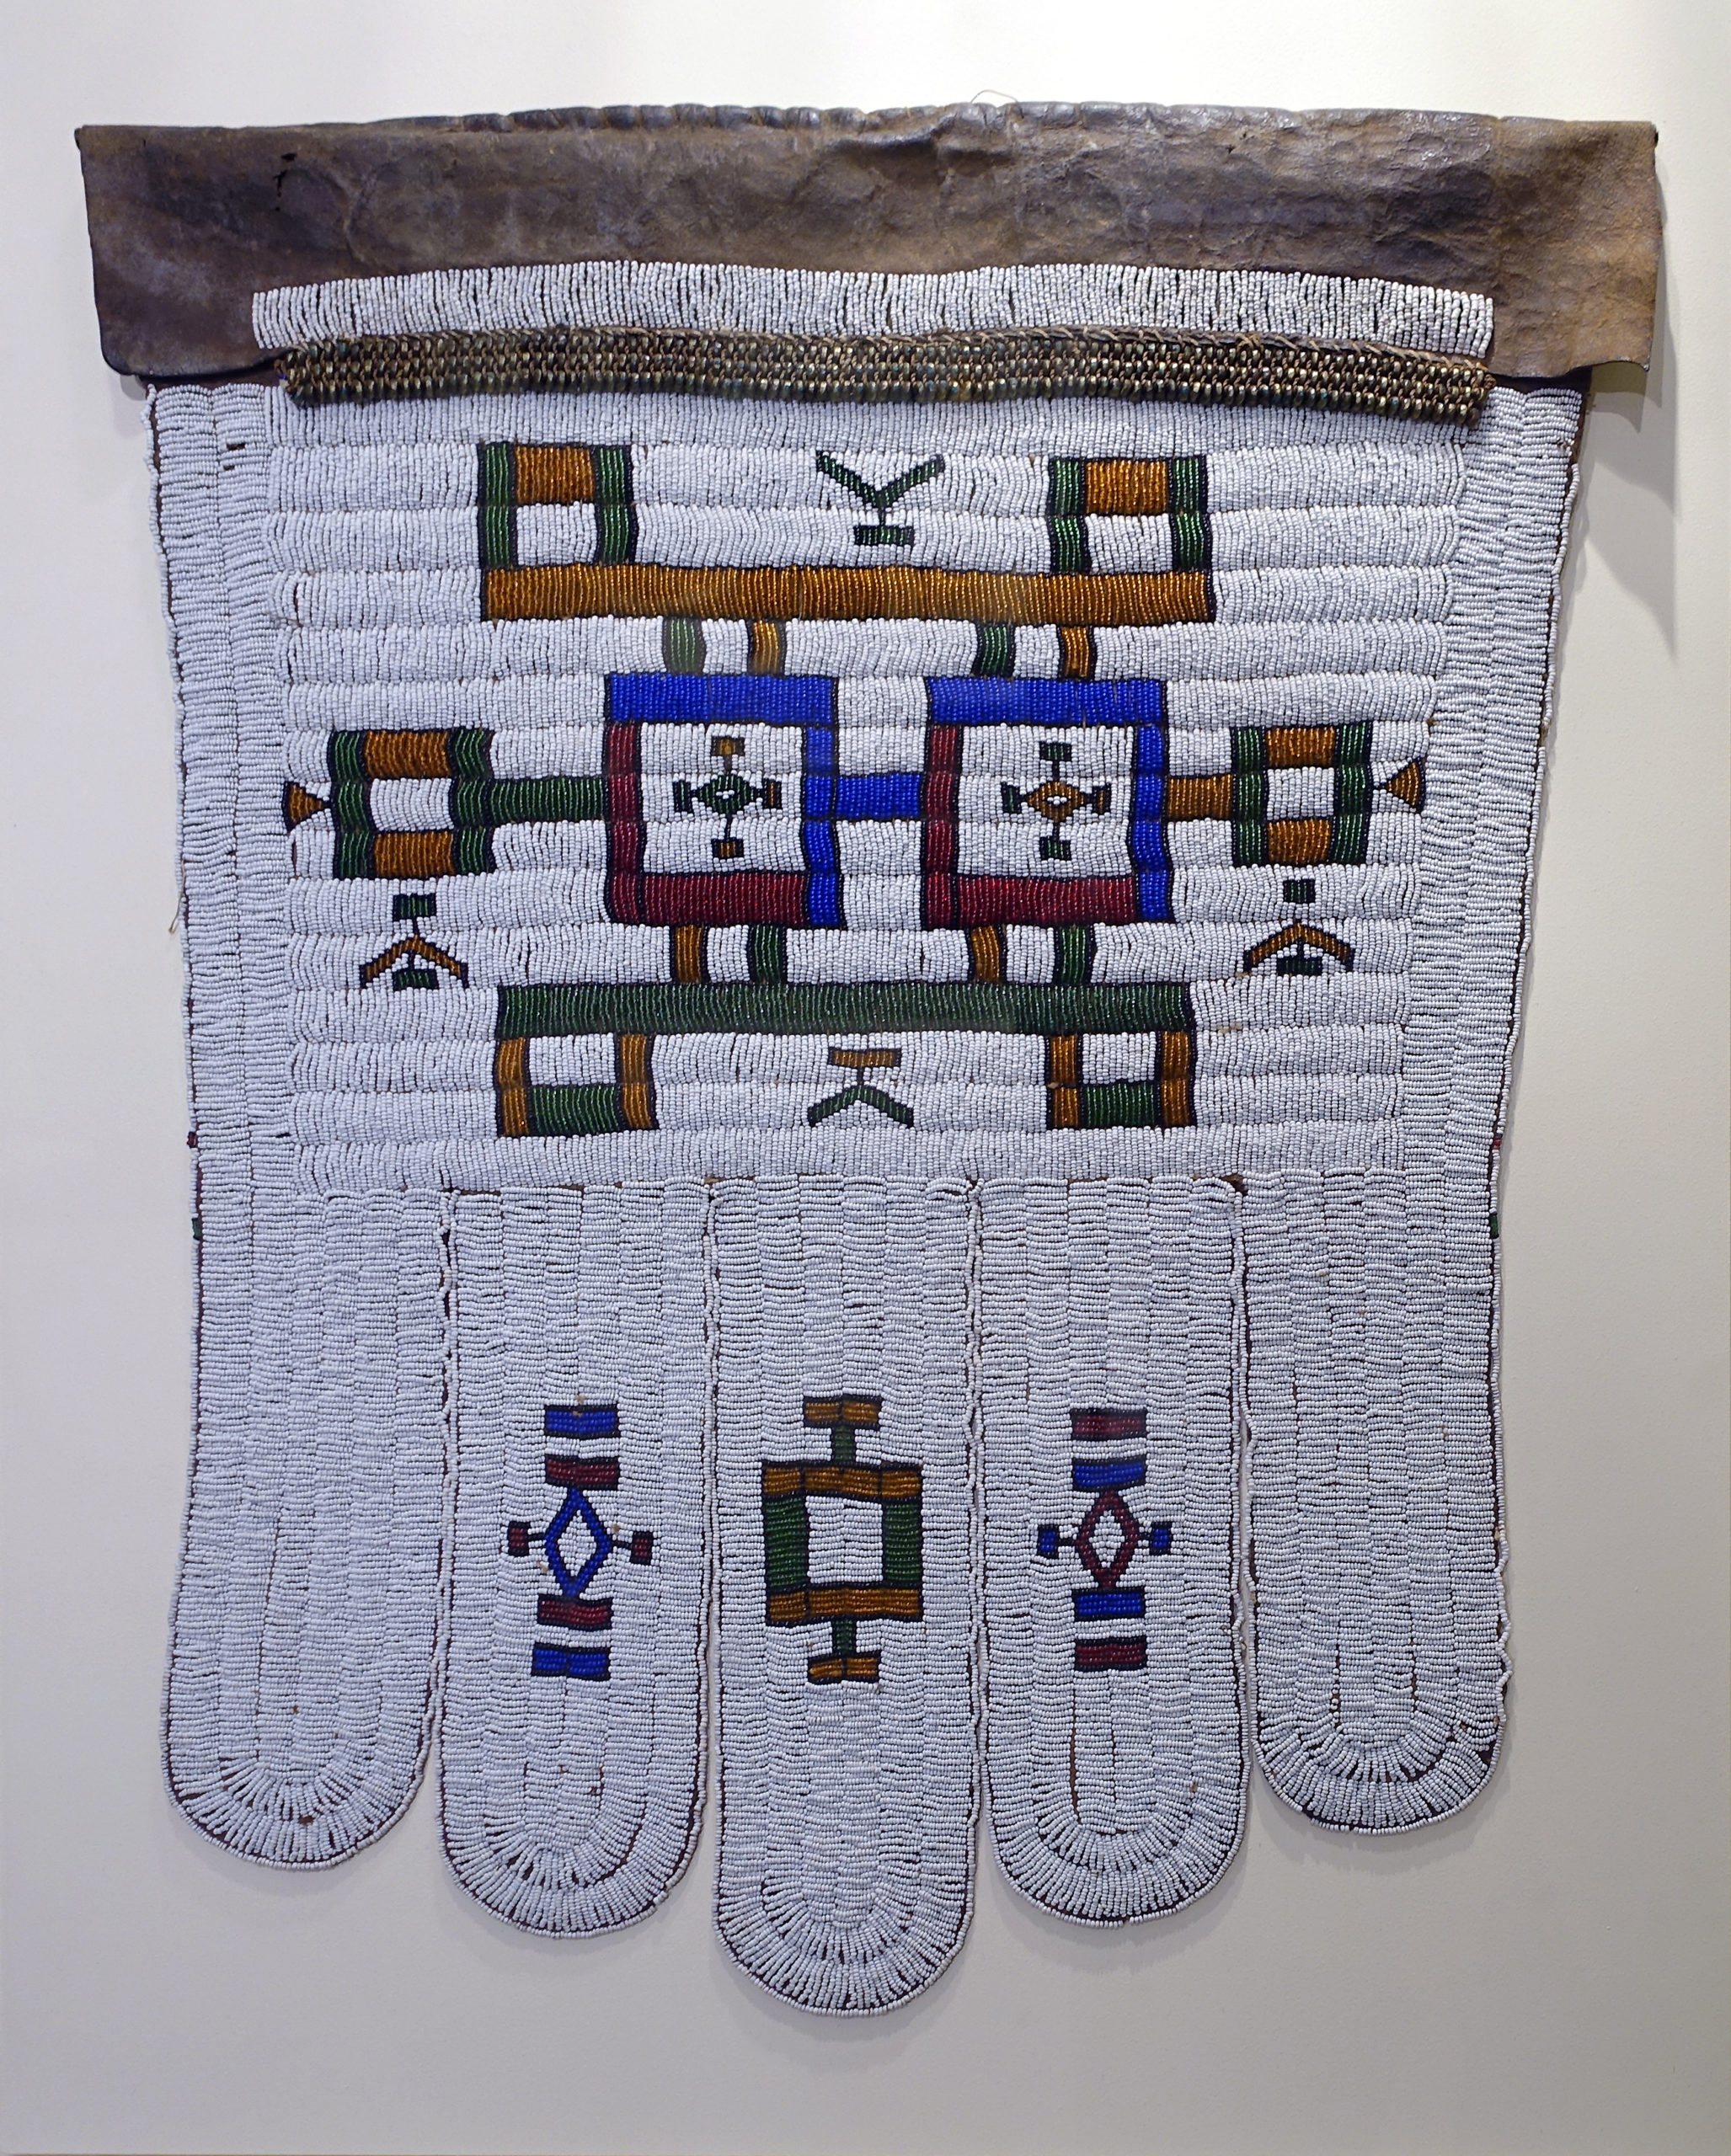 Married Woman’s Apron (Ndebele peoples) Edit